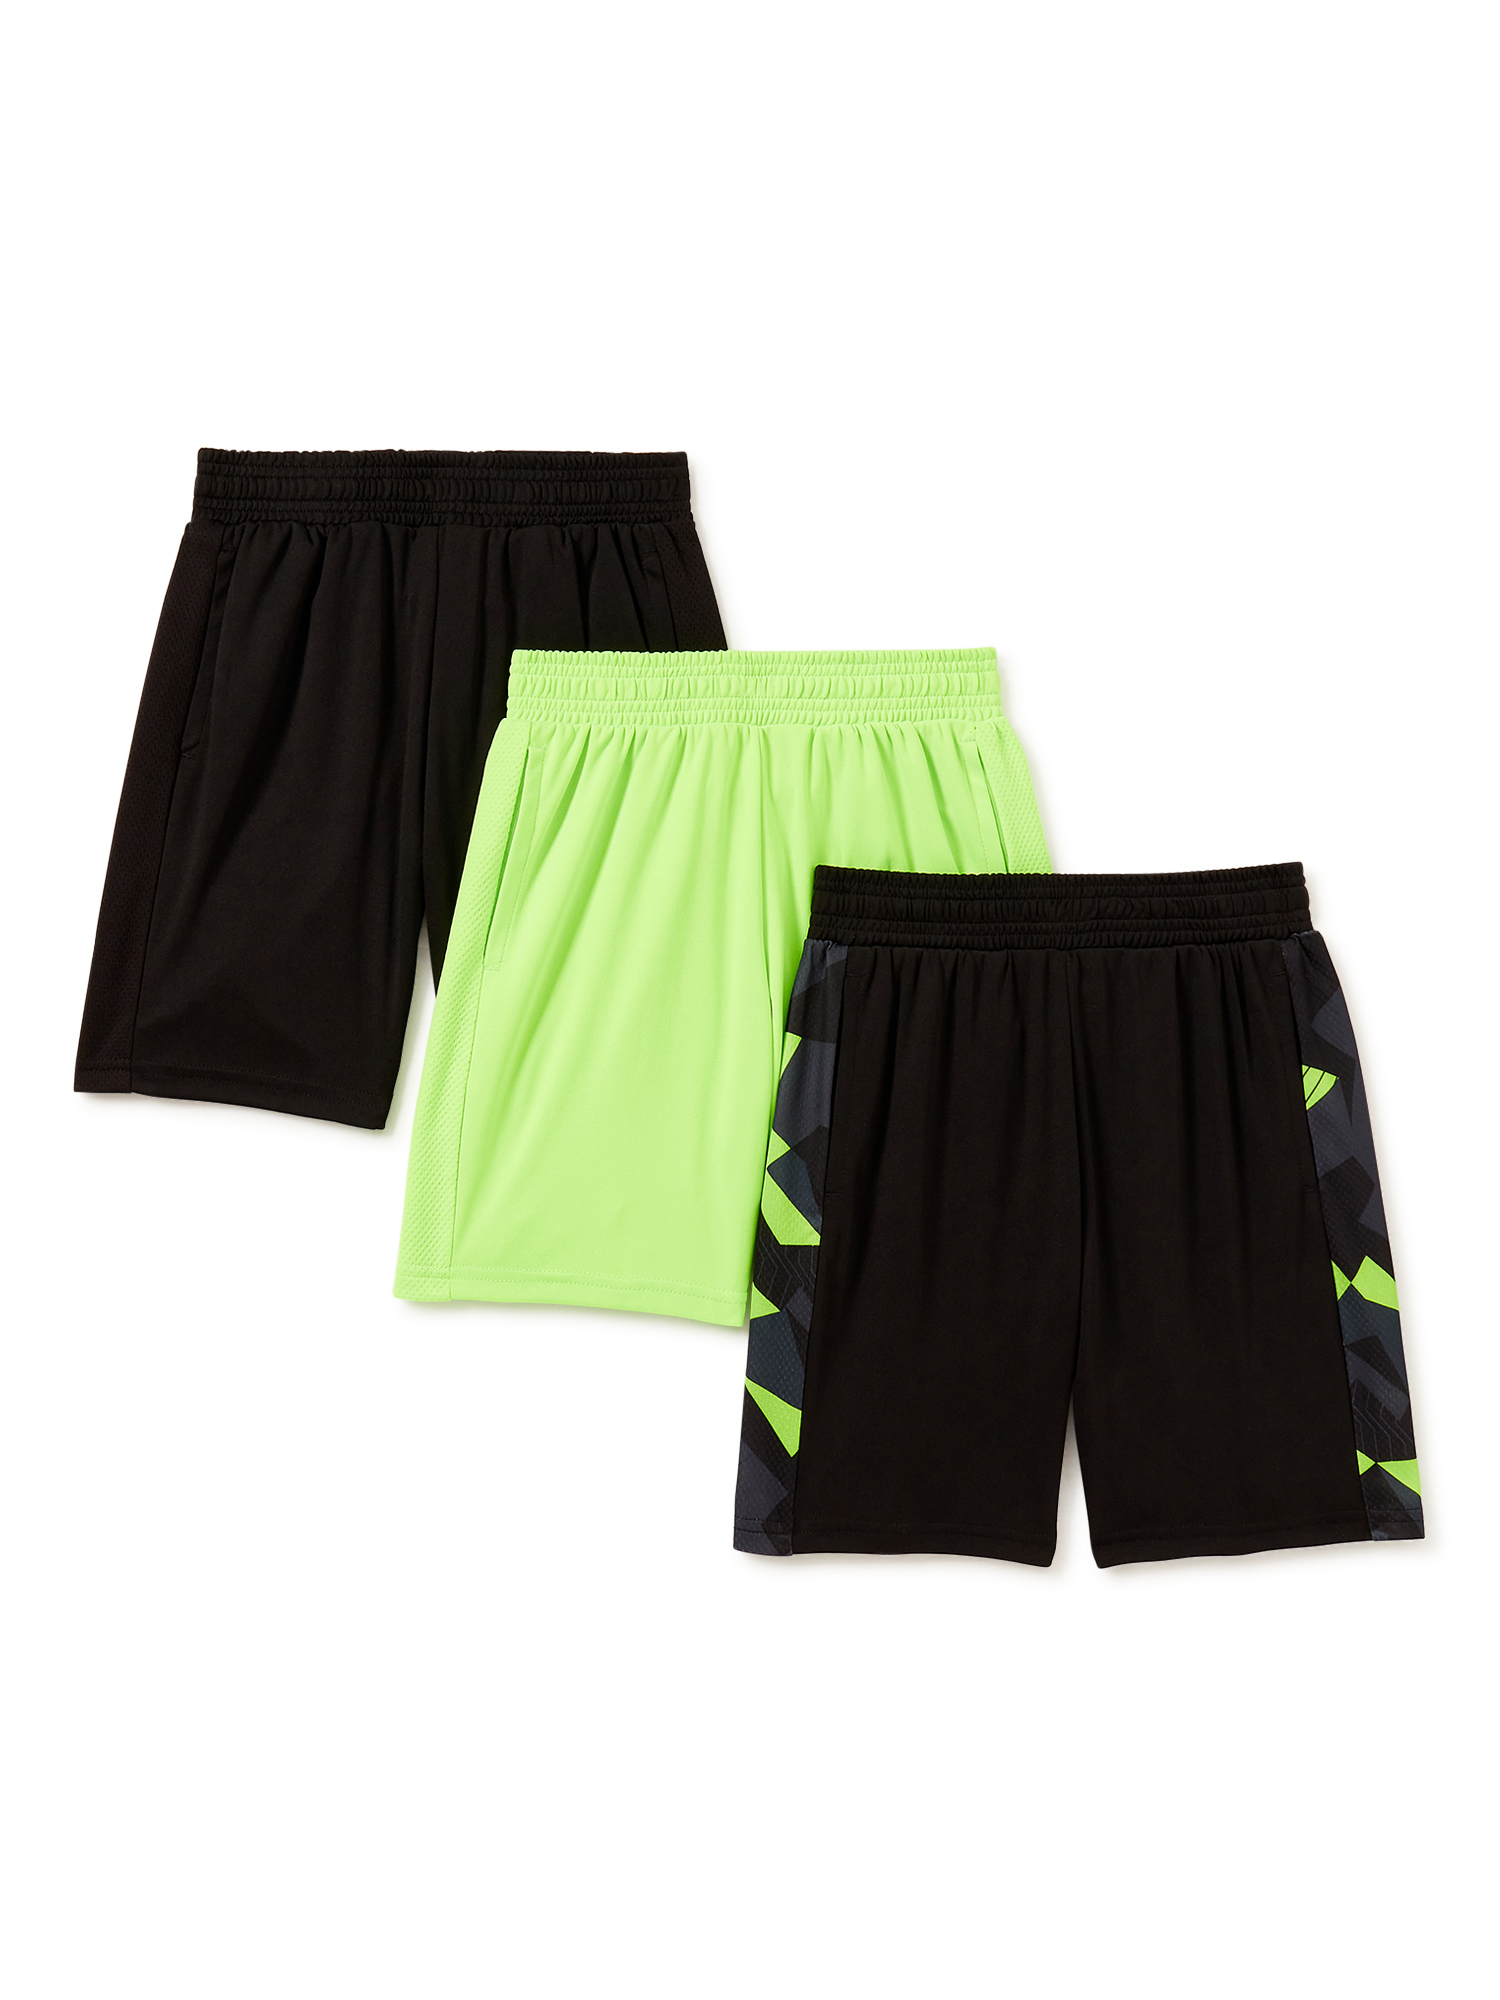 Mad Game Boys Athletic Performance Basketball Shorts 4 Pack